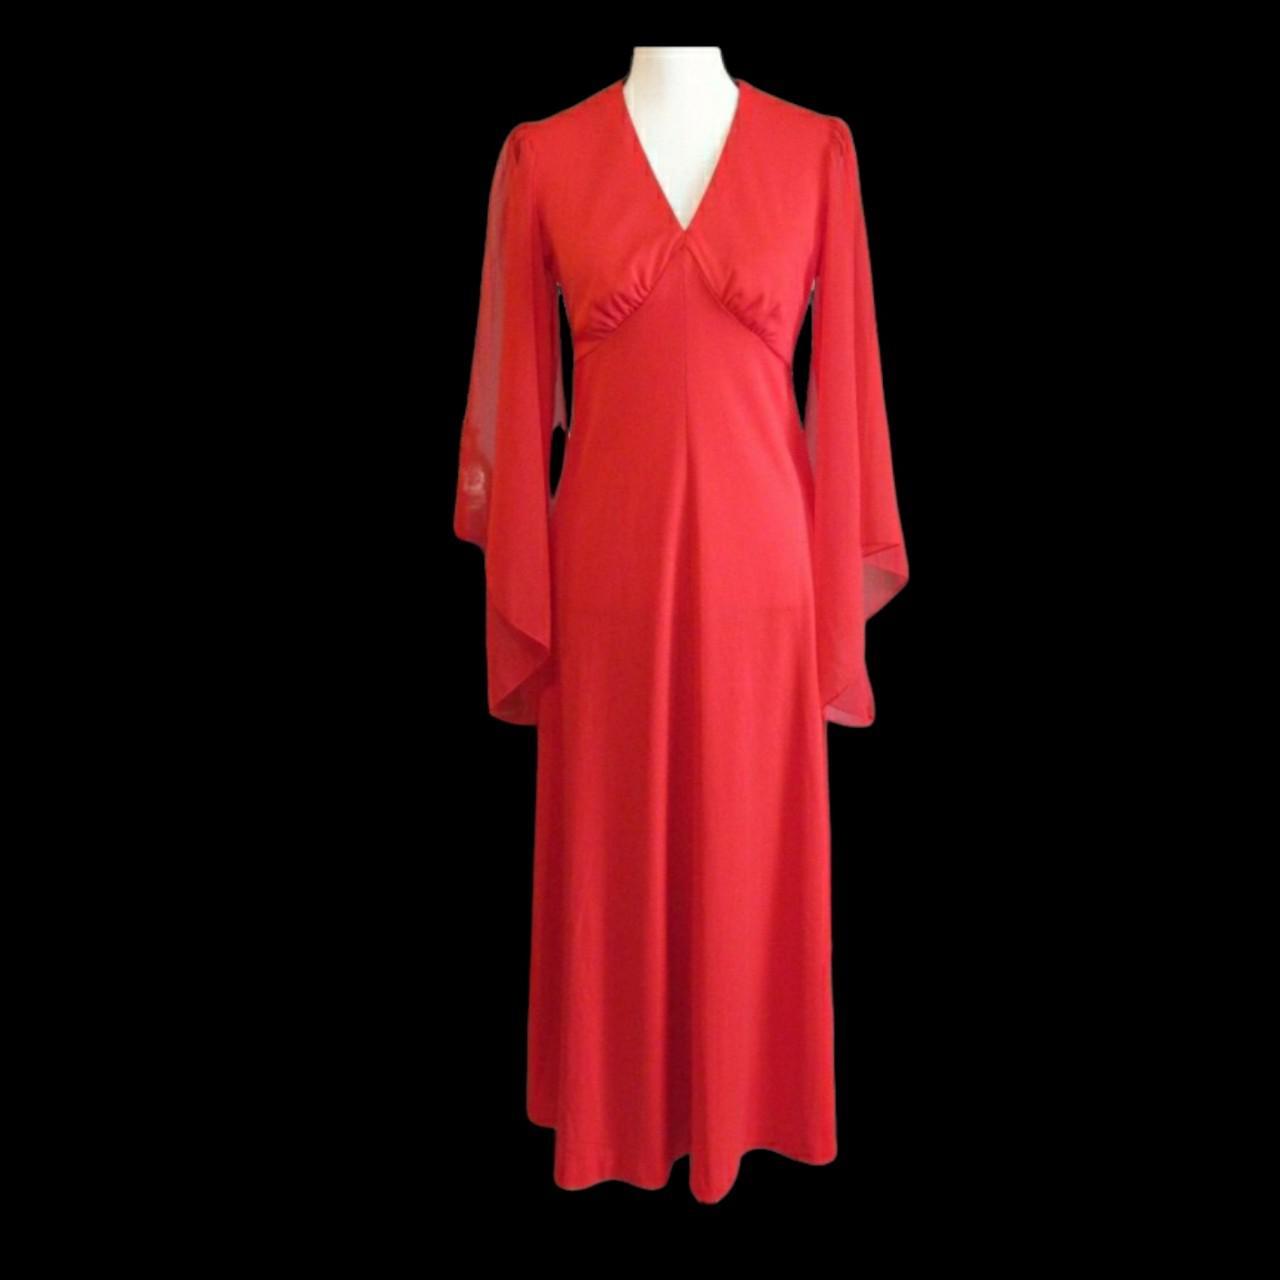 Product Image 1 - Vintage 70s long red dress